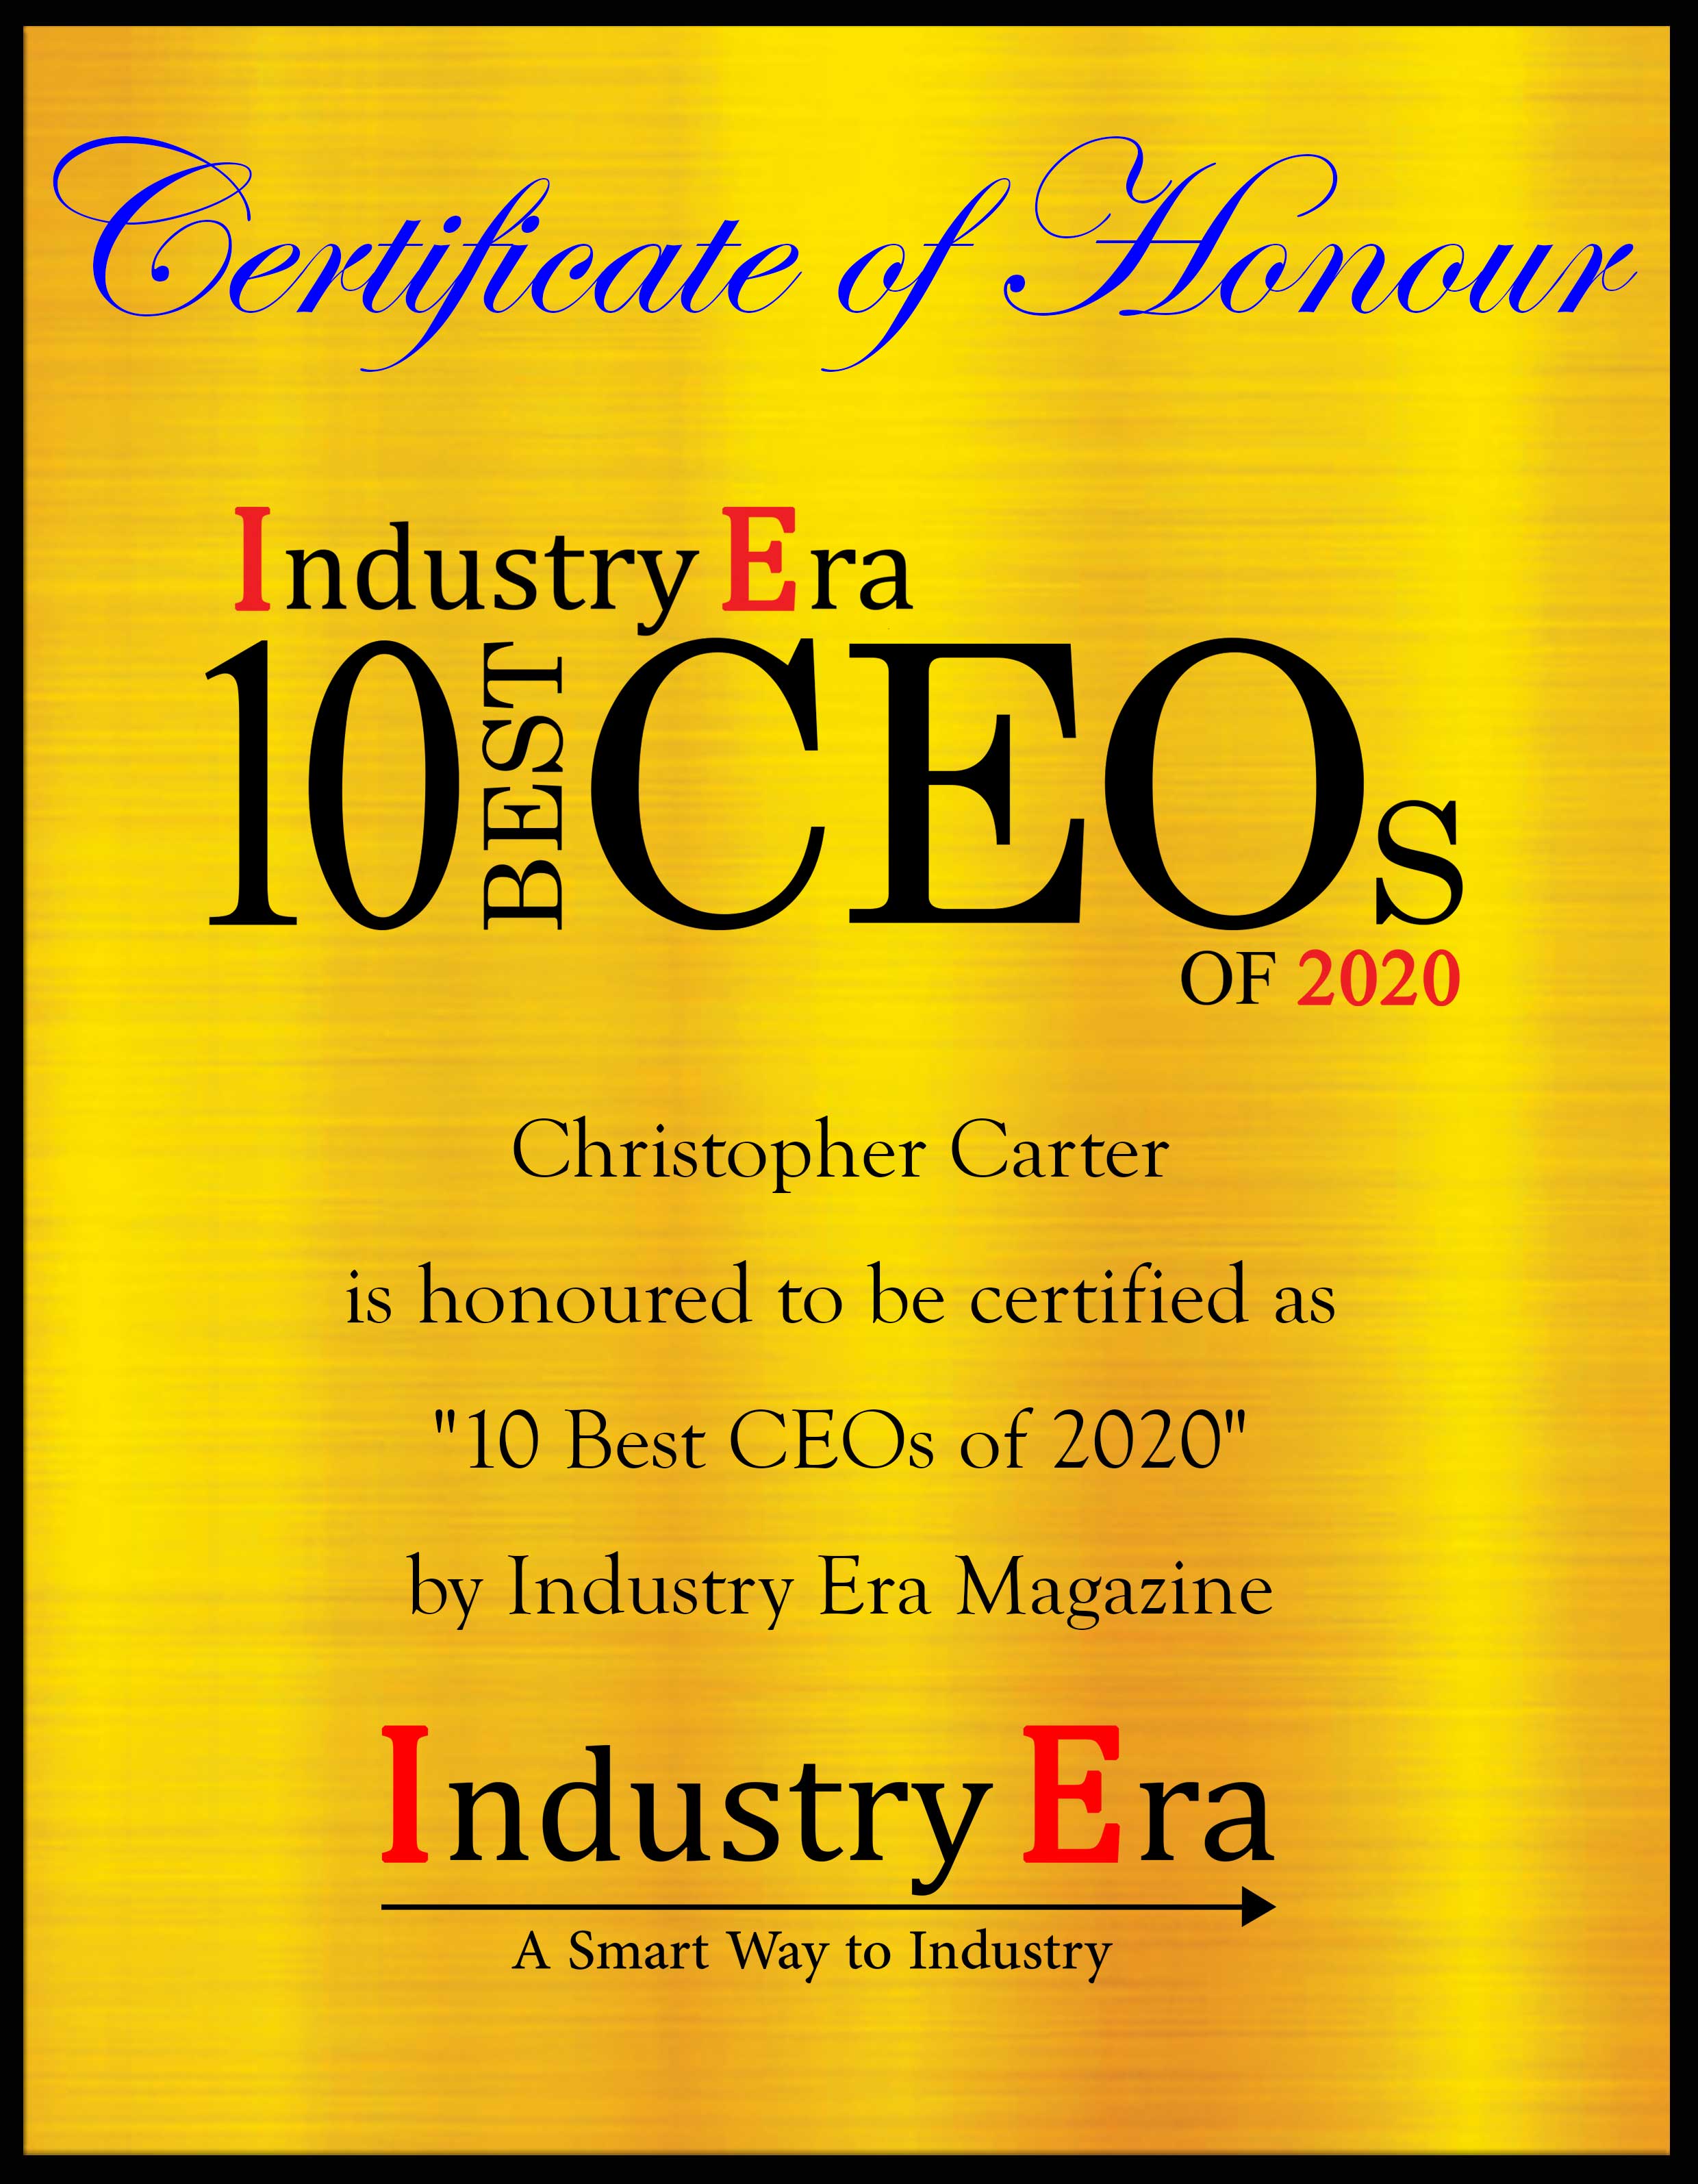 Christopher Carter CEO & Founder Approyo Certificate